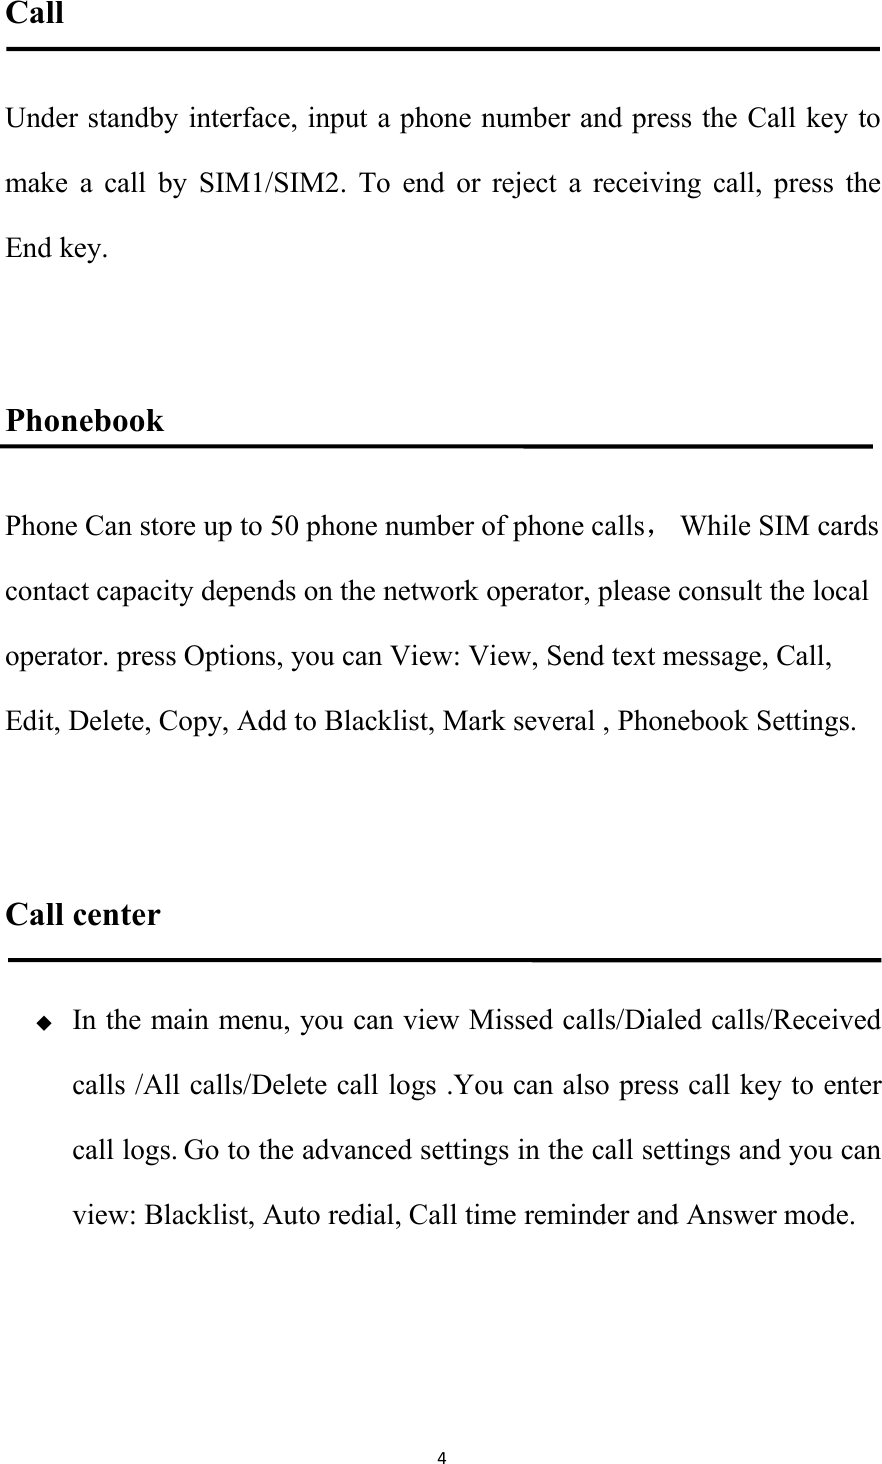 4CallUnder standby interface, input a phone number and press the Call key tomake a call by SIM1/SIM2. To end or reject a receiving call, press theEnd key.PhonebookPhone Can store up to 50 phone number of phone calls，While SIM cardscontact capacity depends on the network operator, please consult the localoperator. press Options, you can View: View, Send text message, Call,Edit, Delete, Copy, Add to Blacklist, Mark several , Phonebook Settings.Call centerIn the main menu, you can view Missed calls/Dialed calls/Receivedcalls /All calls/Delete call logs .You can also press call key to entercall logs. Go to the advanced settings in the call settings and you canview: Blacklist, Auto redial, Call time reminder and Answer mode.